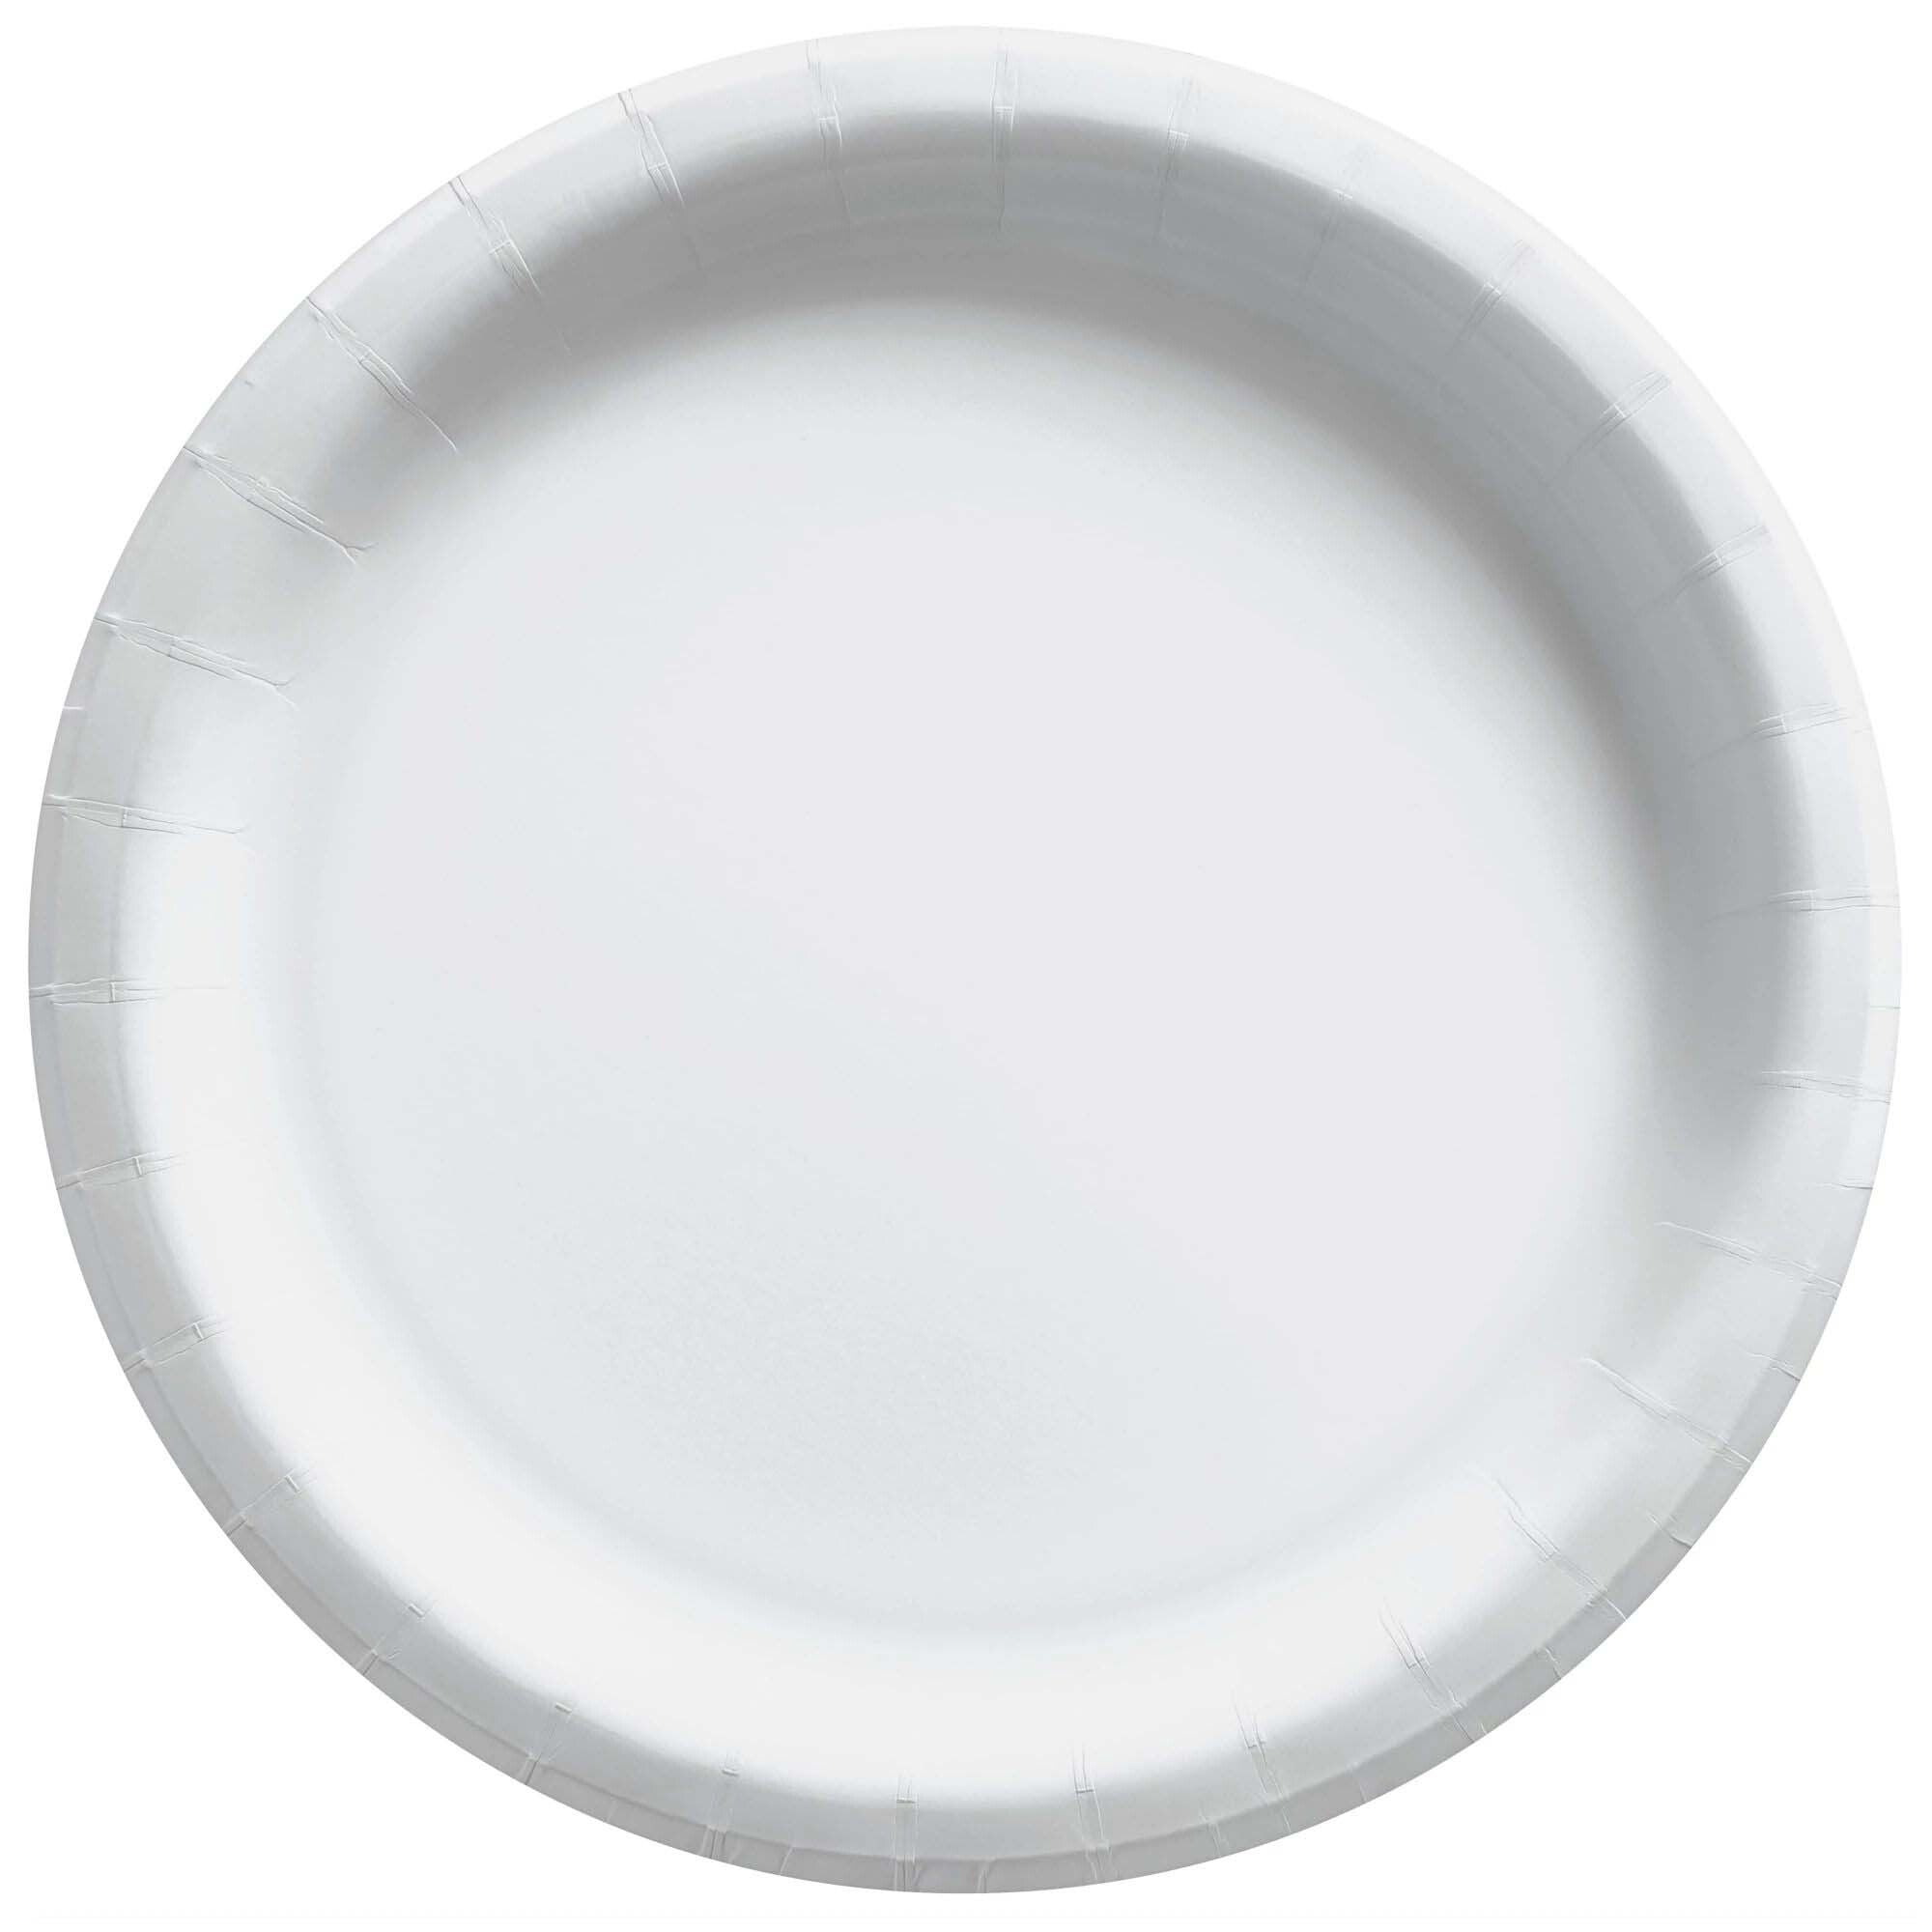 Frosty White Round Paper Plates, 9 Inches, 20 Count